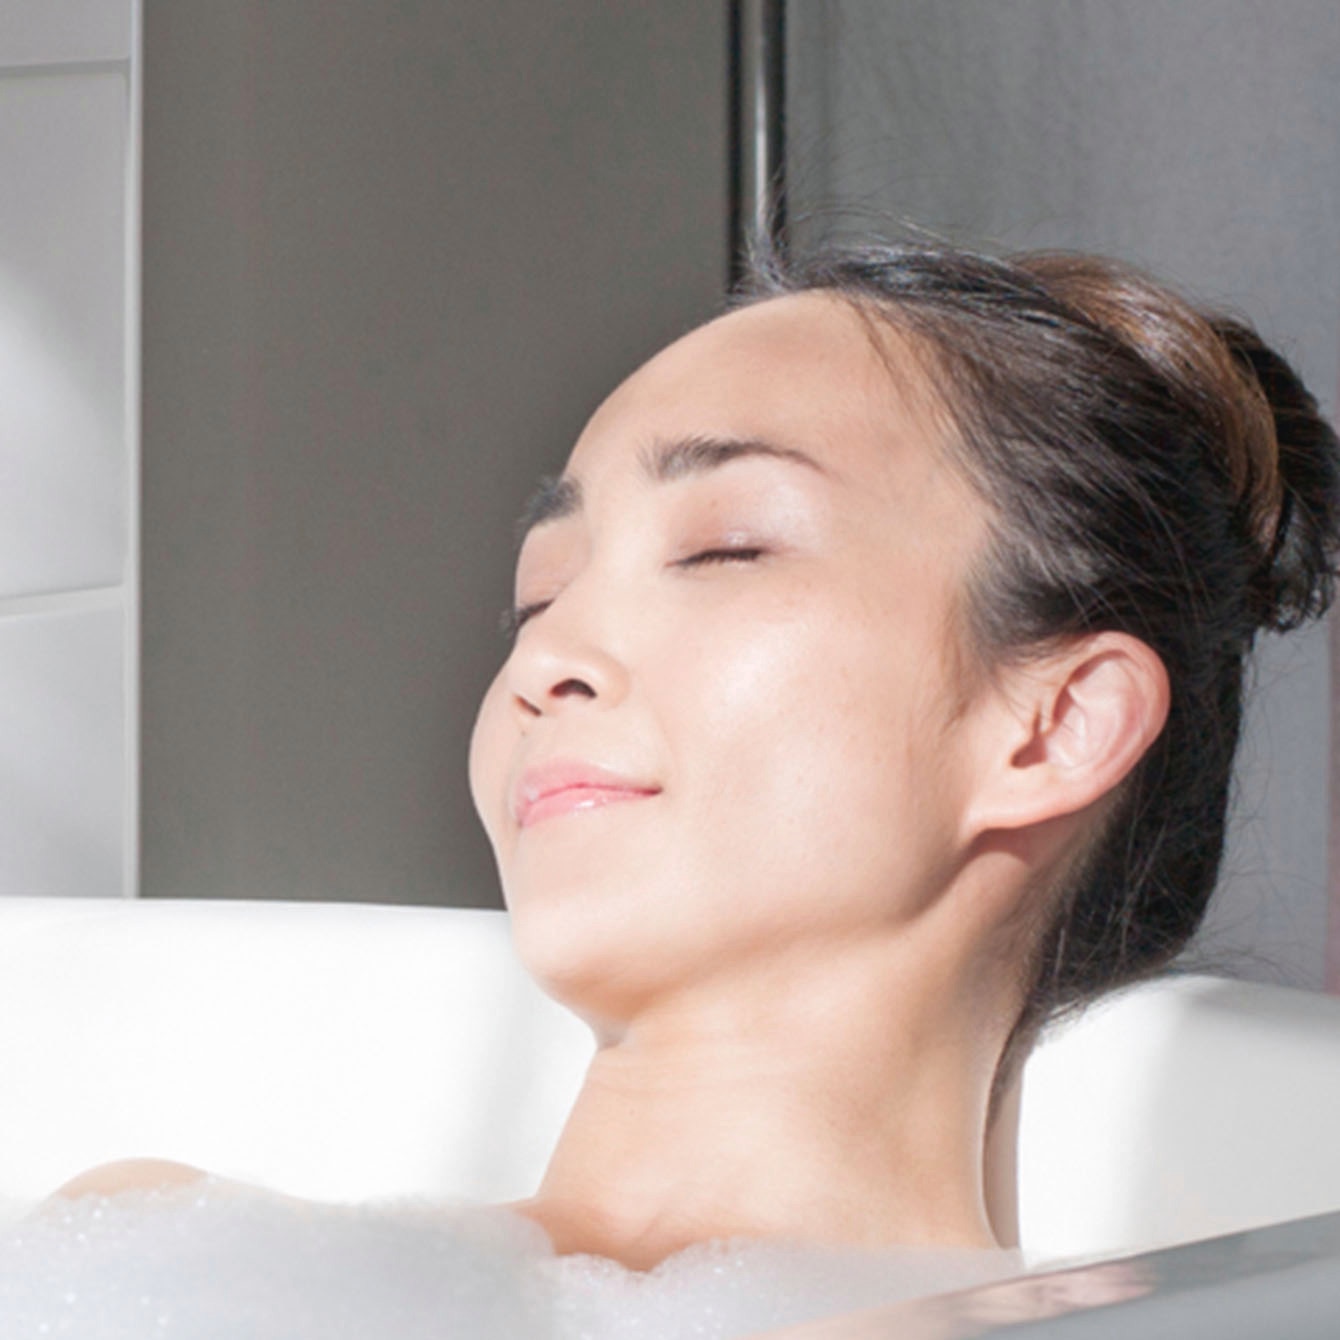 Six incredible ingredients to boost your bath and shower